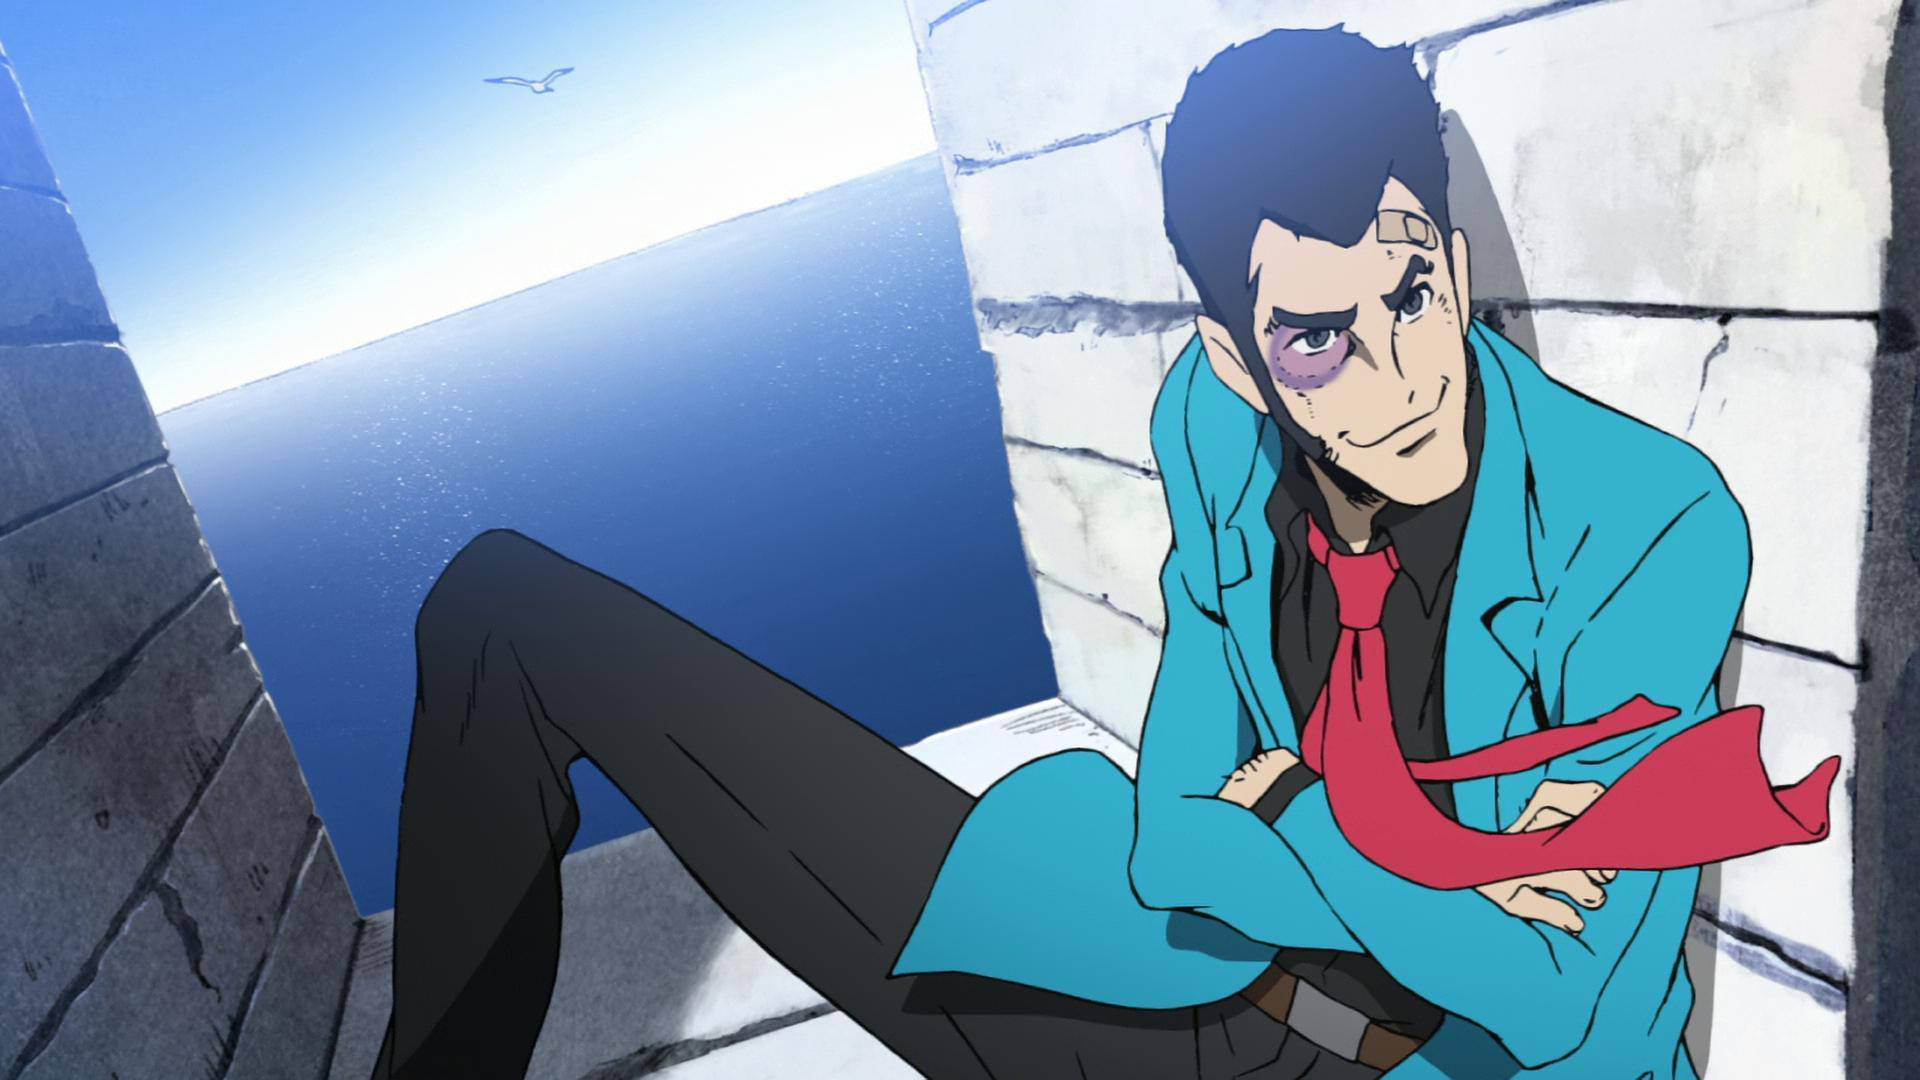 Lupin The Third Main Character Background